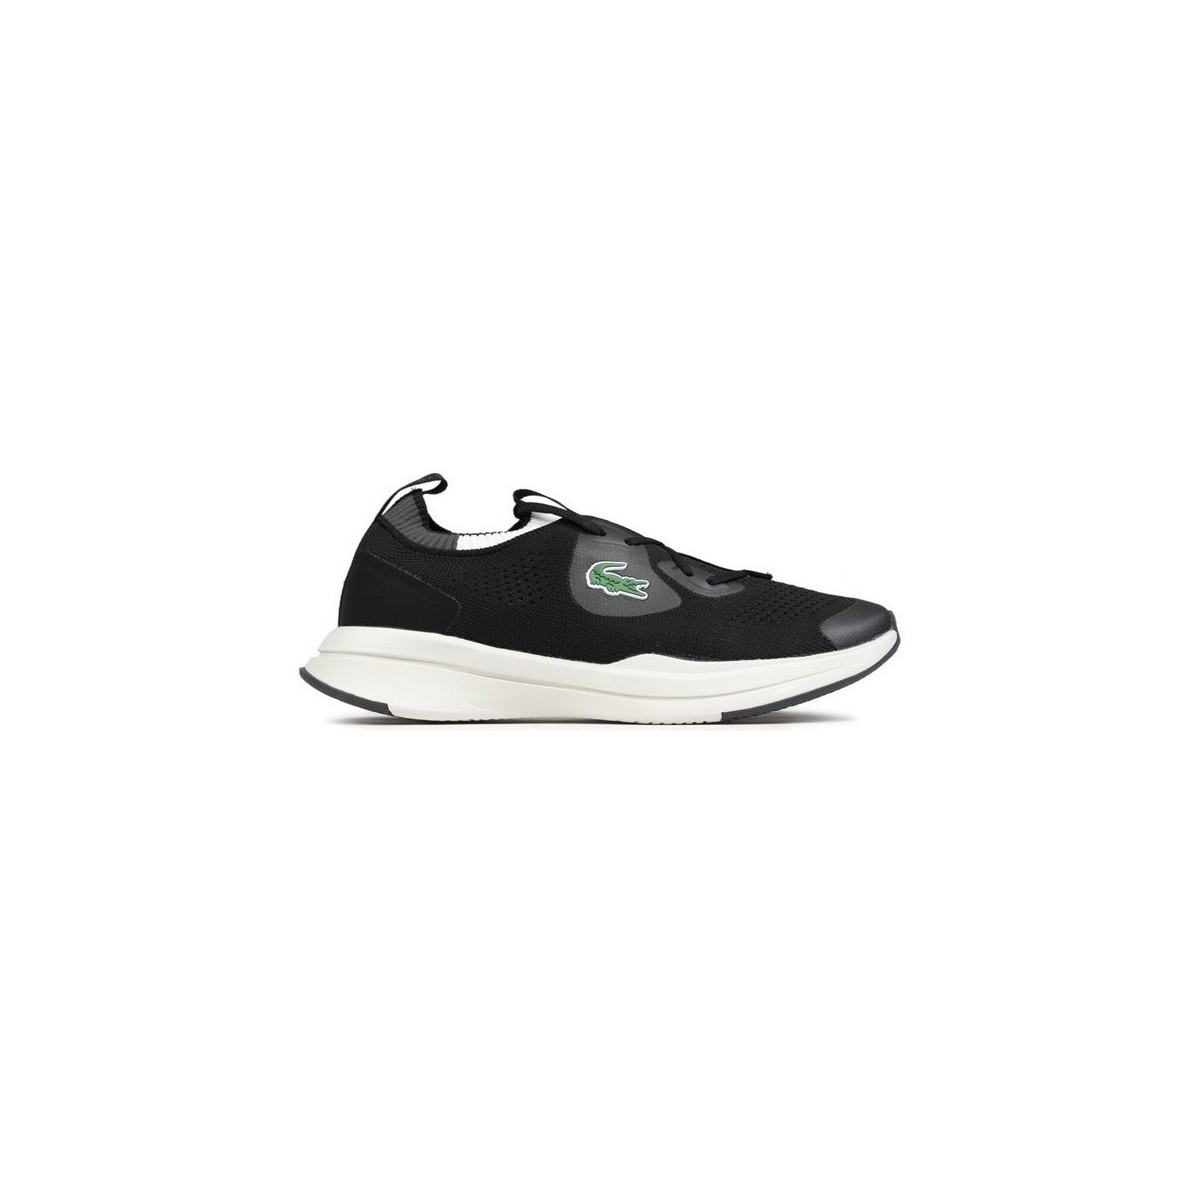 Chaussures Femme Fitness / Training Lacoste Run Spin Baskets Style Course Noir